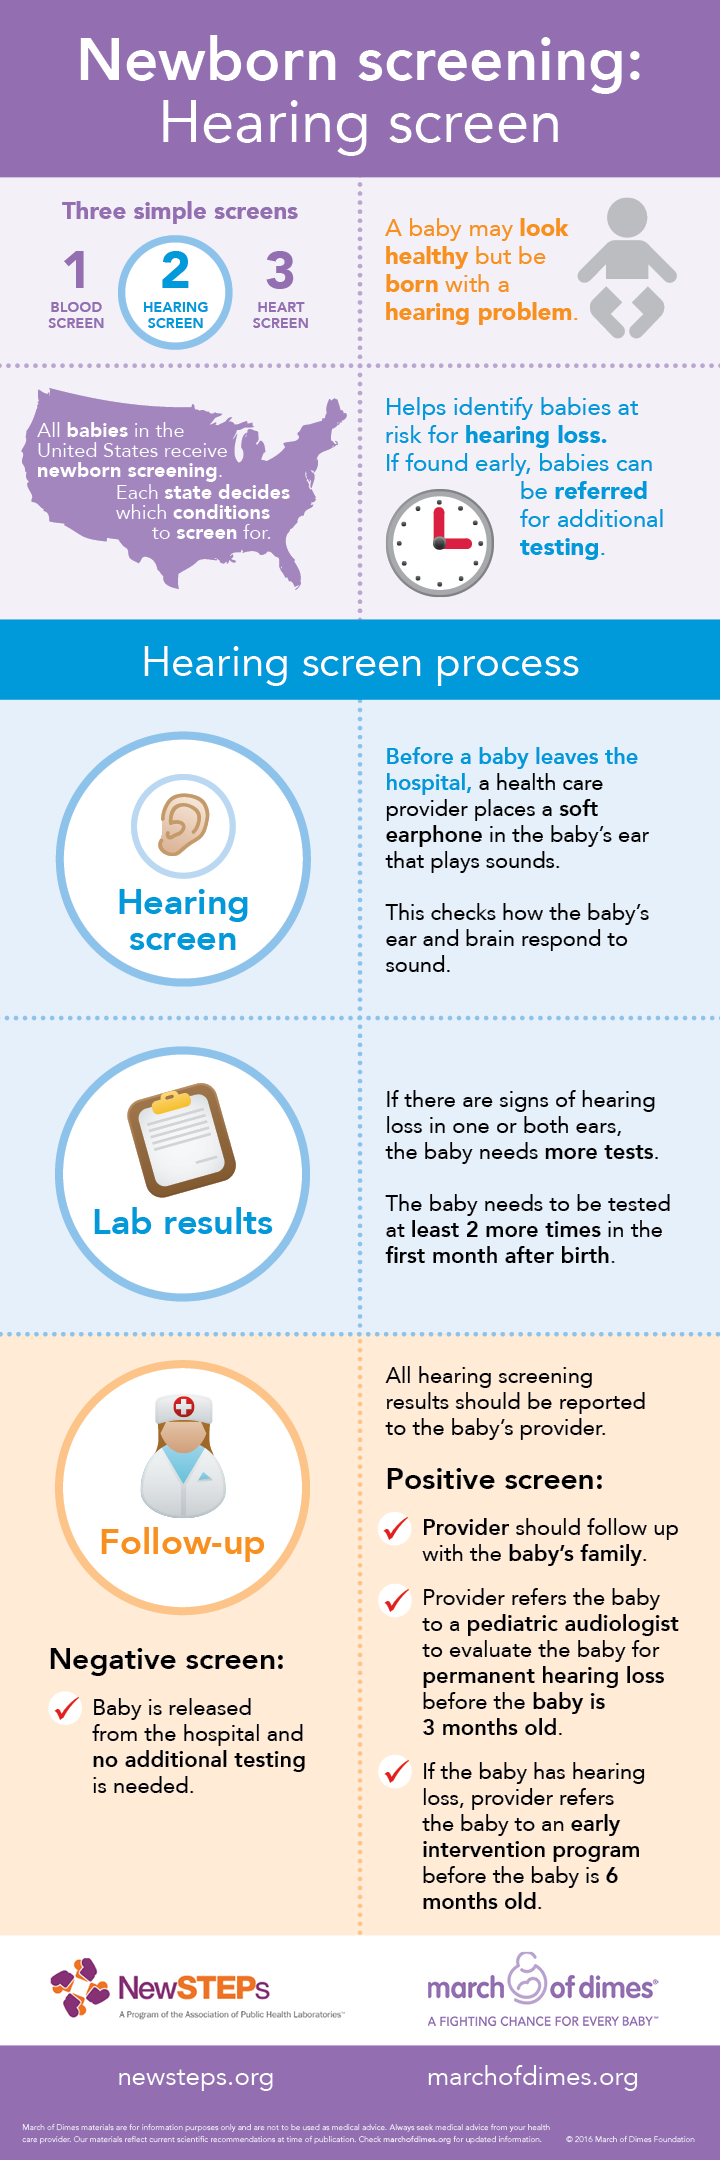 Hearing Loss Infographic